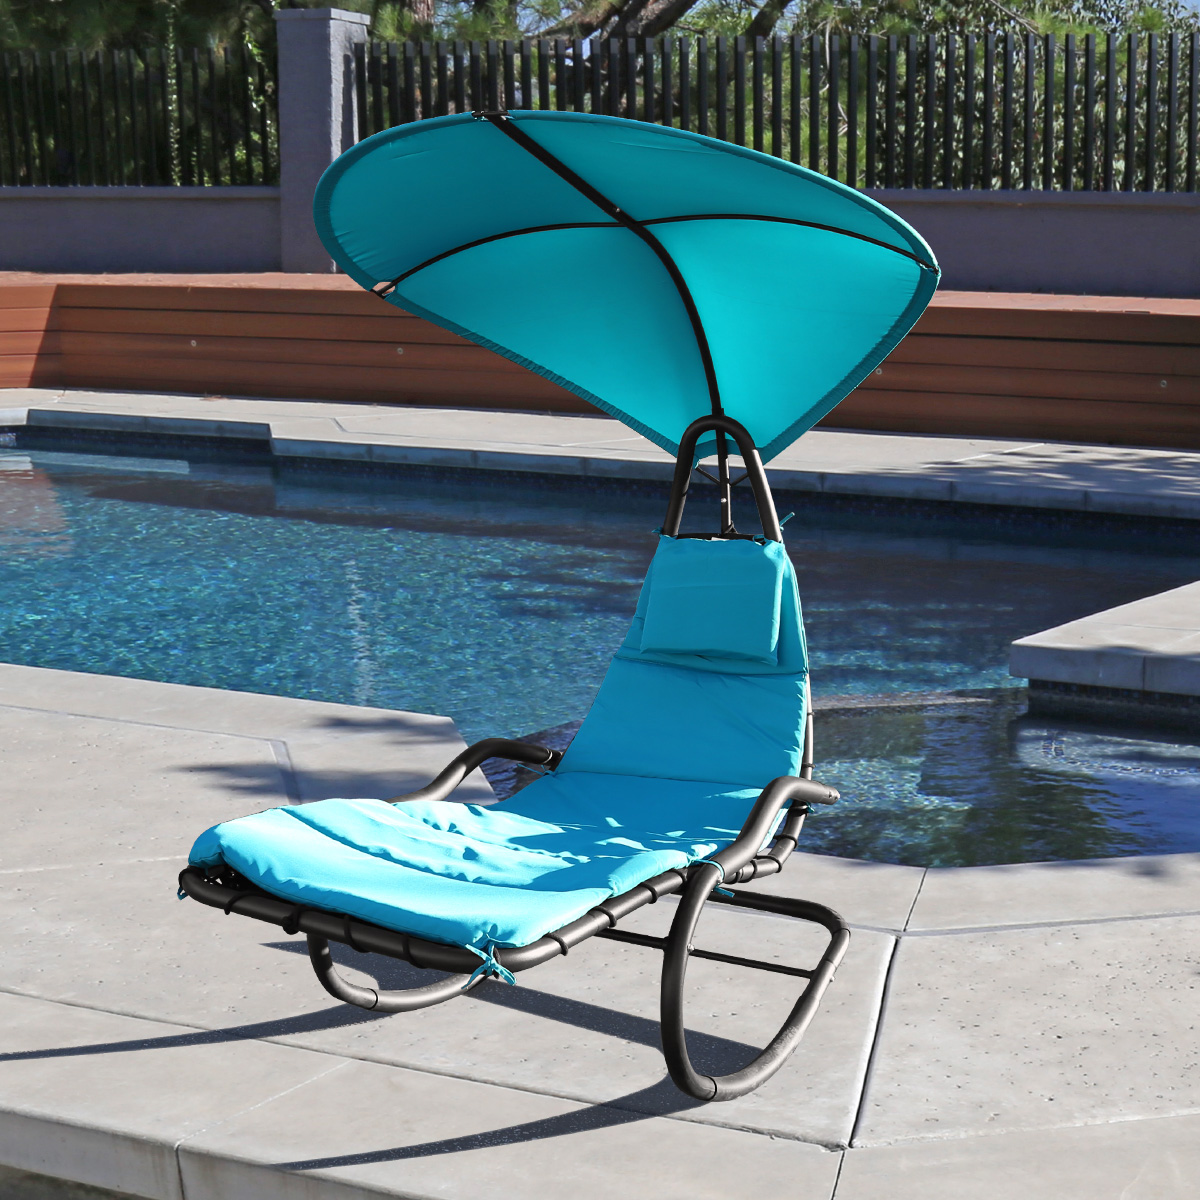 Rocking Hanging Lounge Chair - Curved Chaise Rocking Lounge Chair Swing For Backyard Patio w/ Built-in Pillow Removable Canopy with stand {Blue} - image 2 of 8